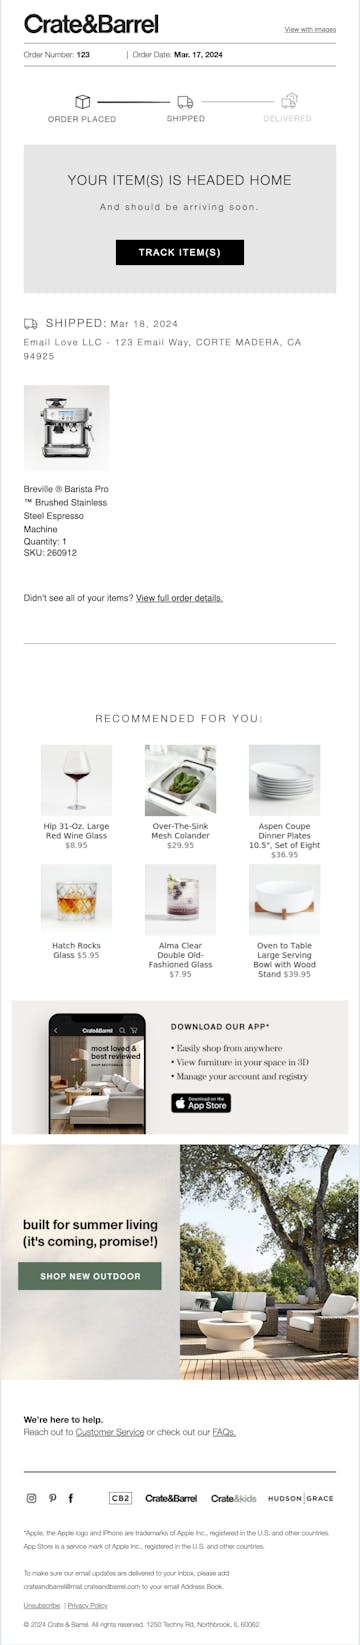 Crate & Barrel Email Designs Thumbnail Preview